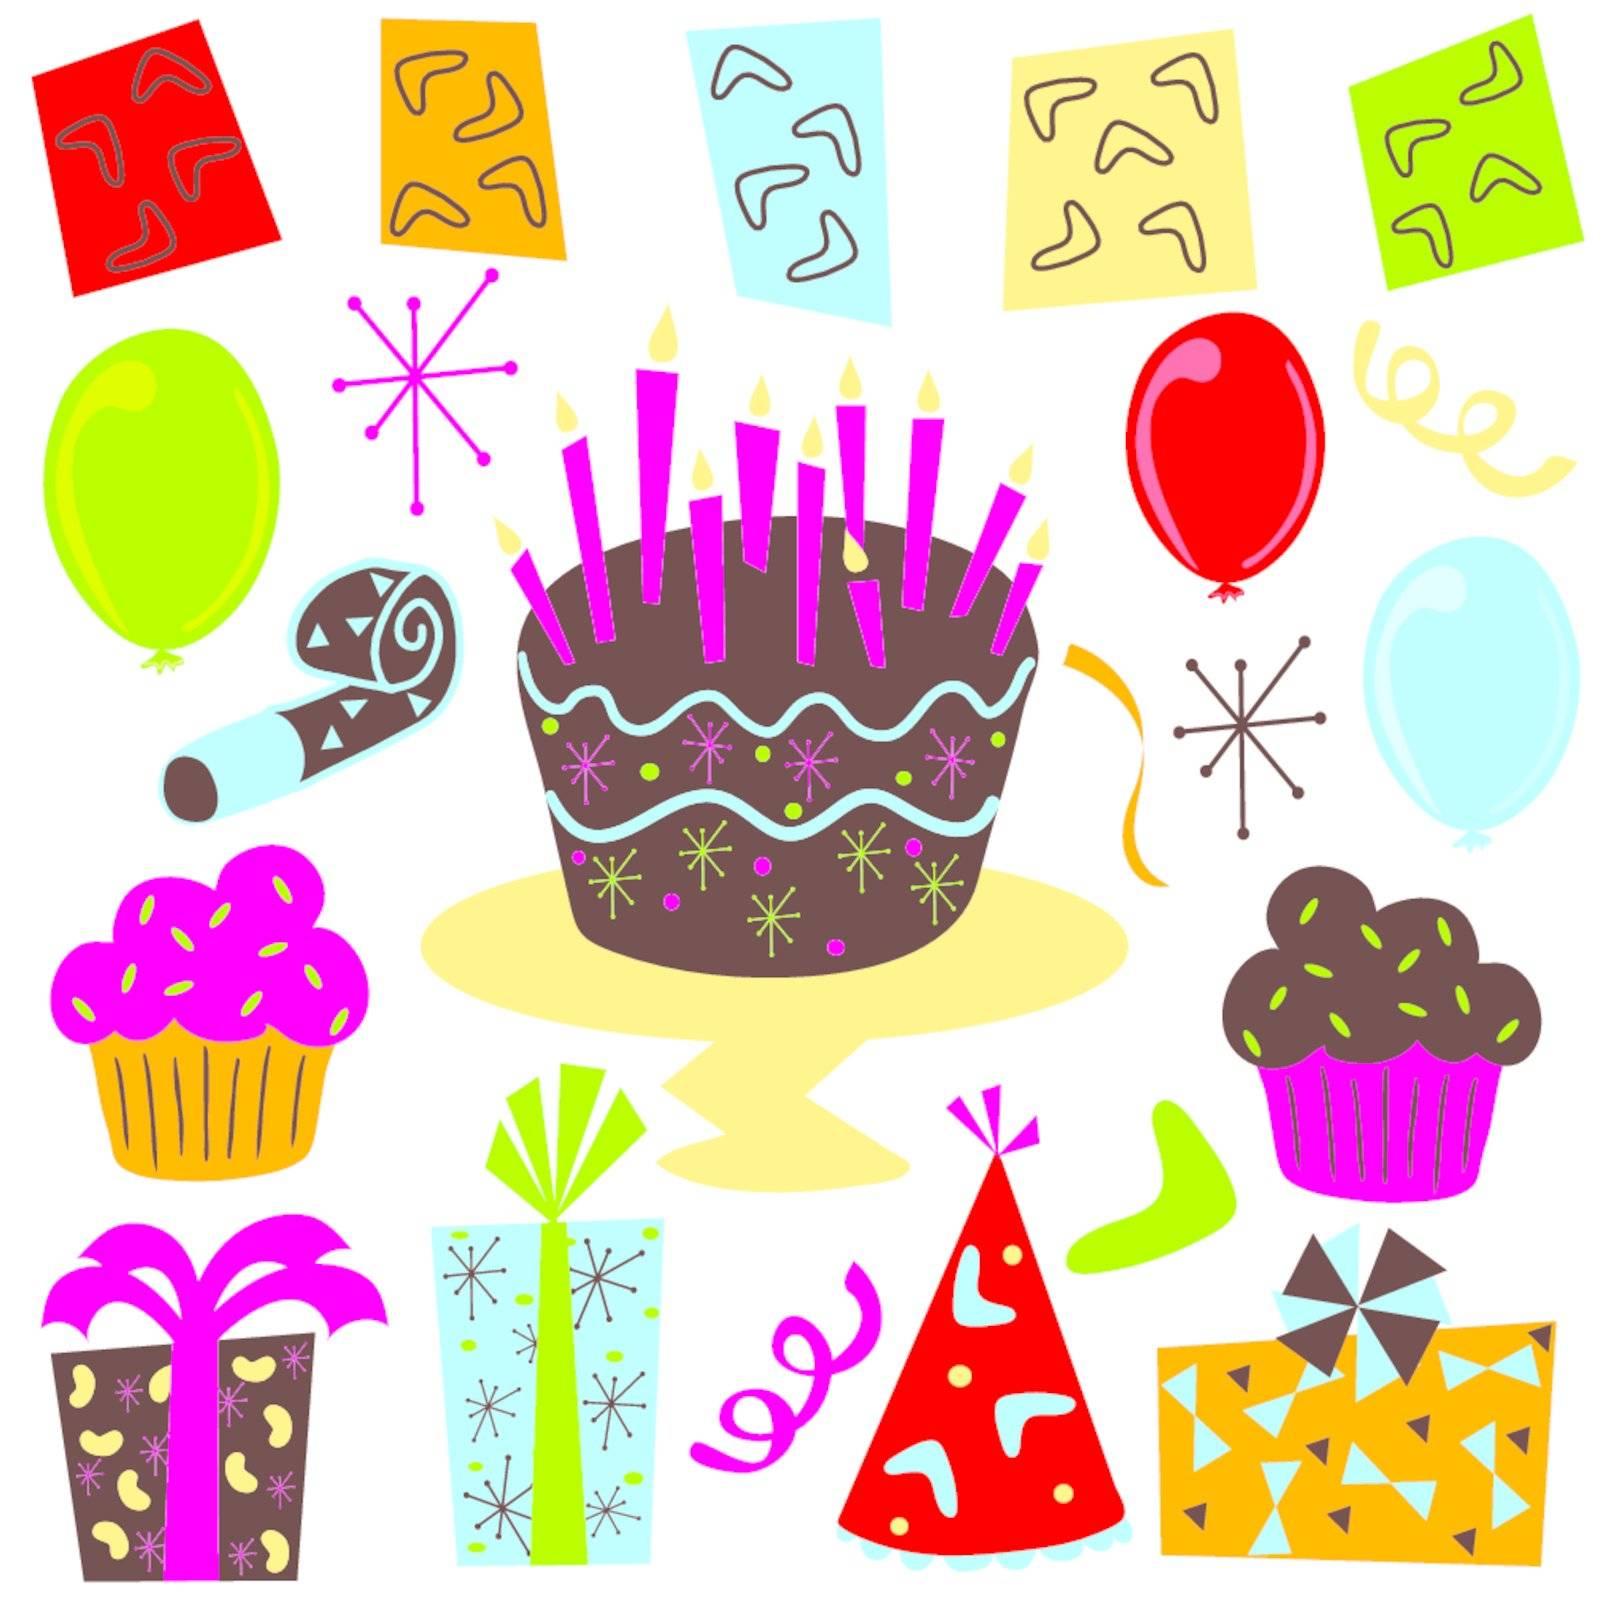 Retro Birthday Party clipart with birthday cake, cupcakes, balloons, streamers, party favors, presents and 1950's symbols